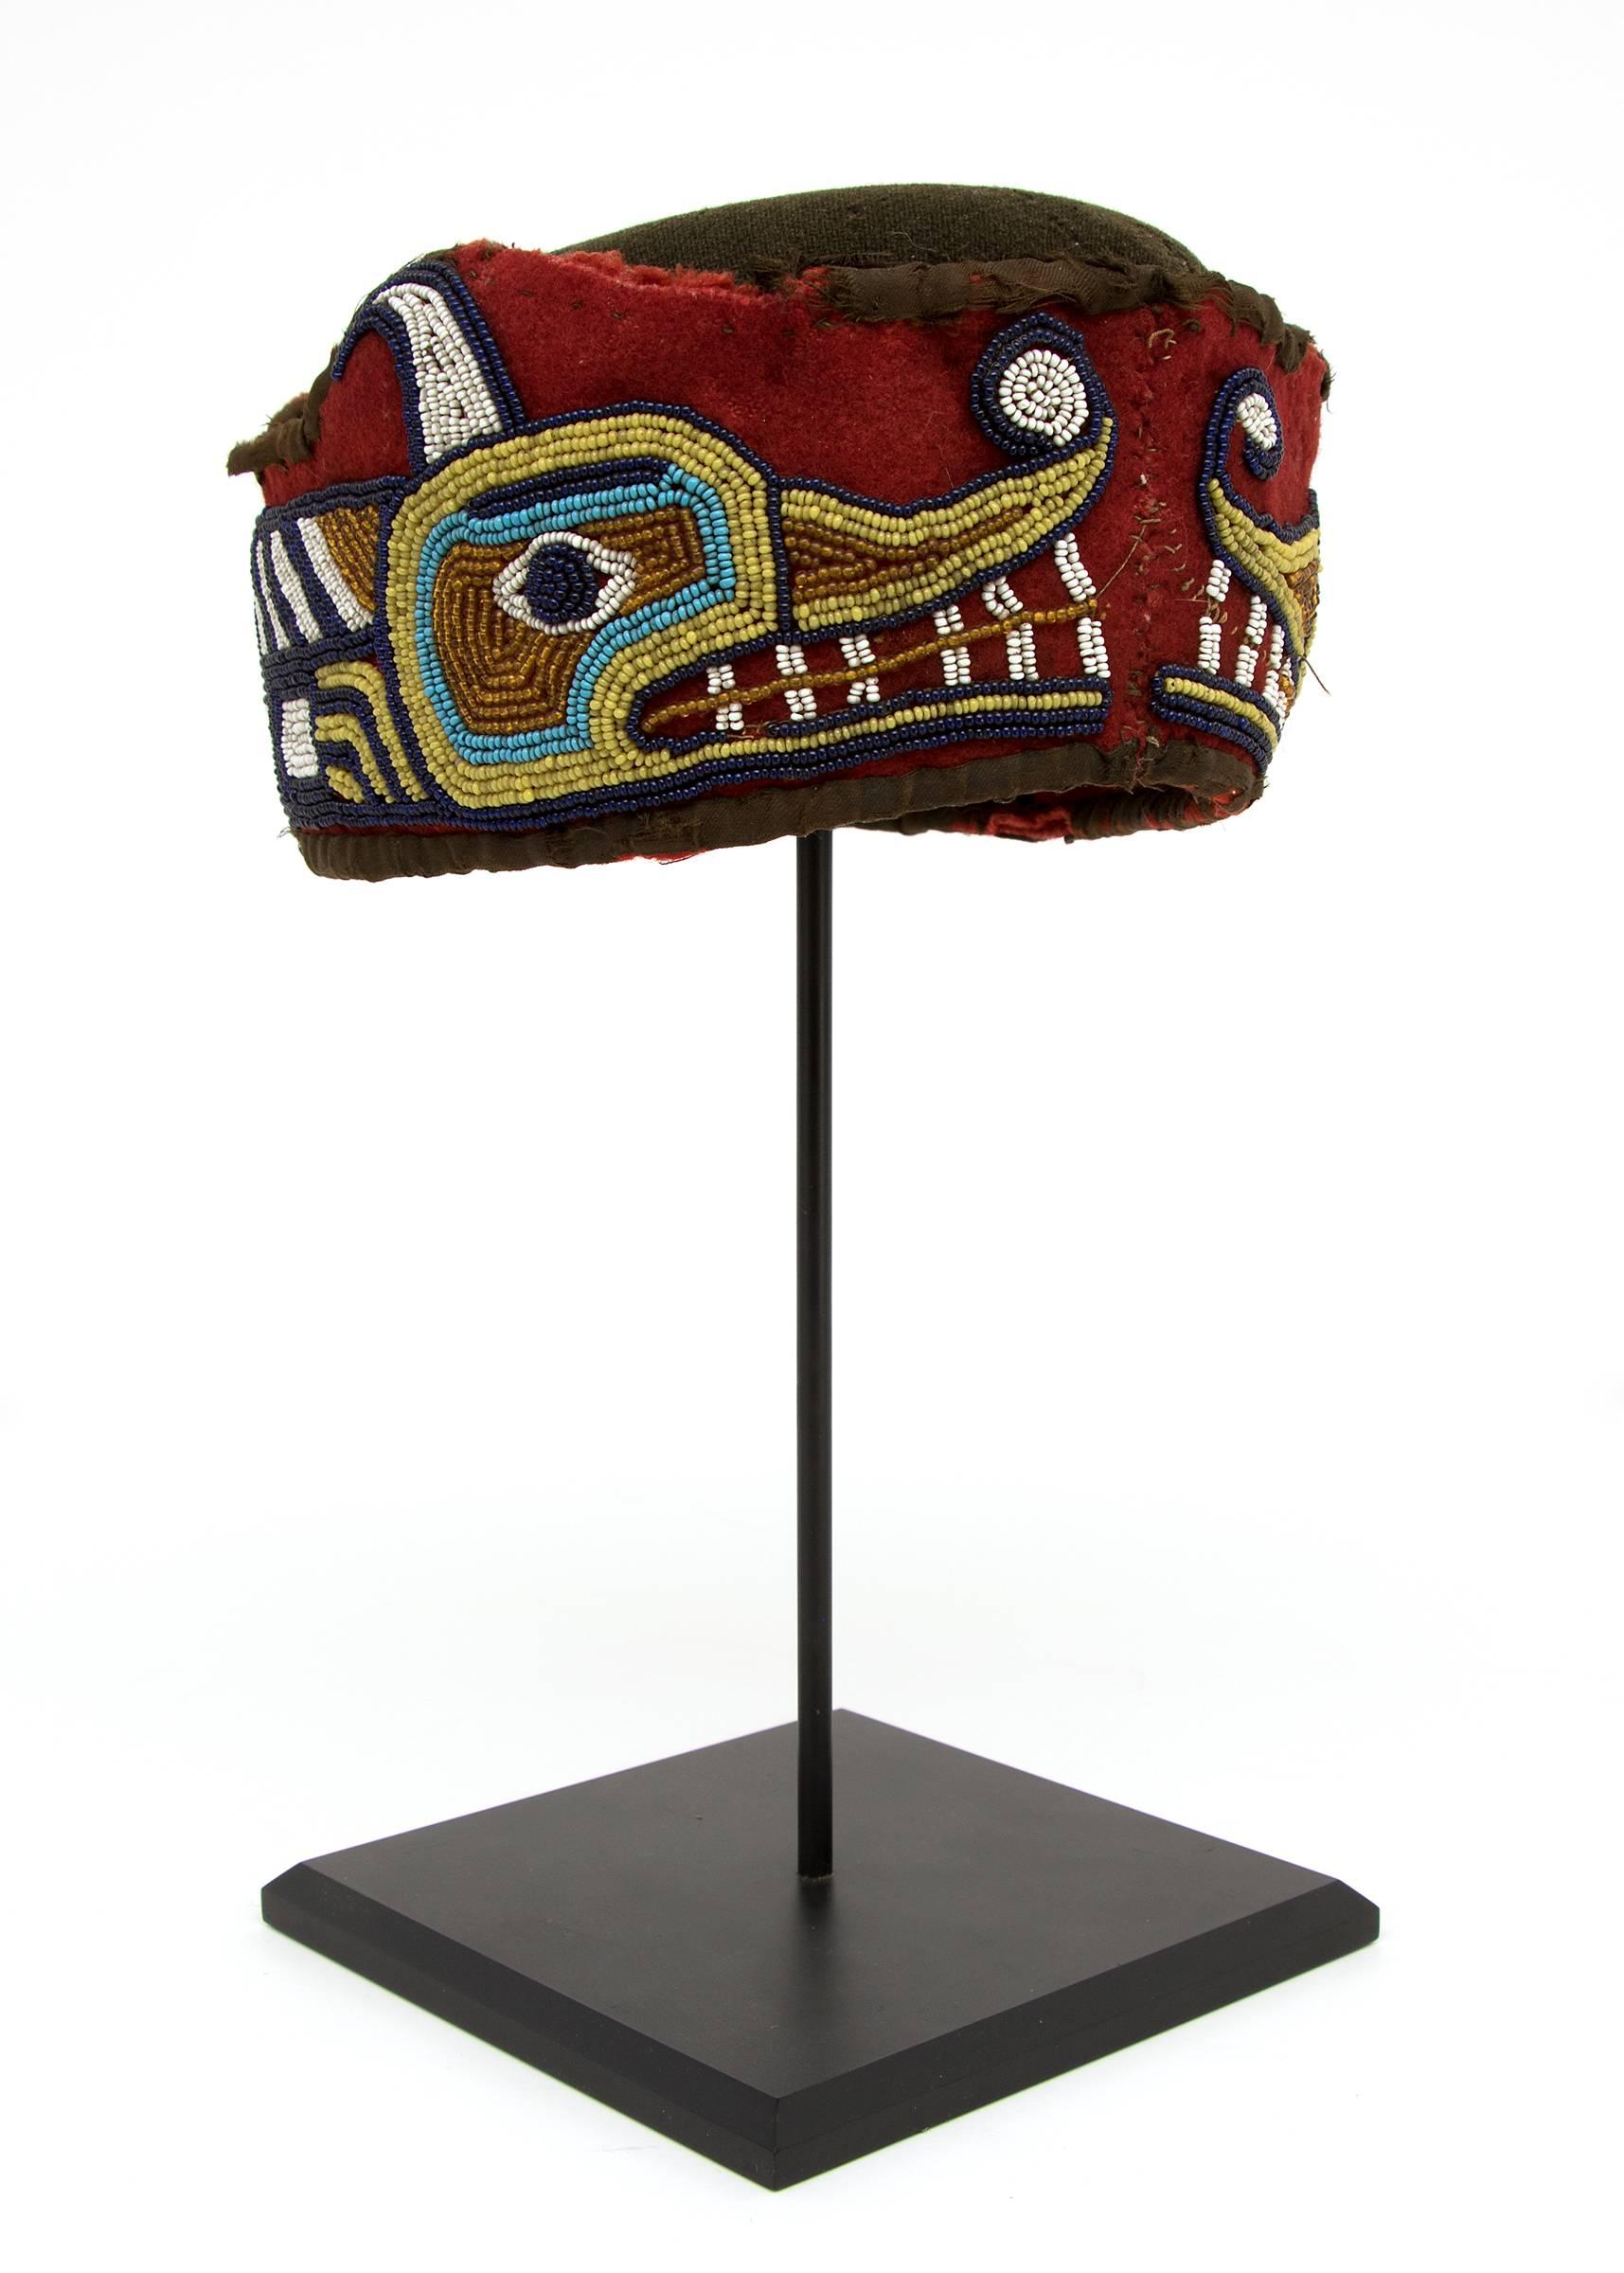 Antique Native American Northwest Coast Beaded Head Ring with a Sisiutl Design, Kwakwaka'wakw (Kwakiutl), circa 1890, constructed of Trade cloth and glass beads.
Measurements listed include the custom tabletop display stand. The hat alone measures